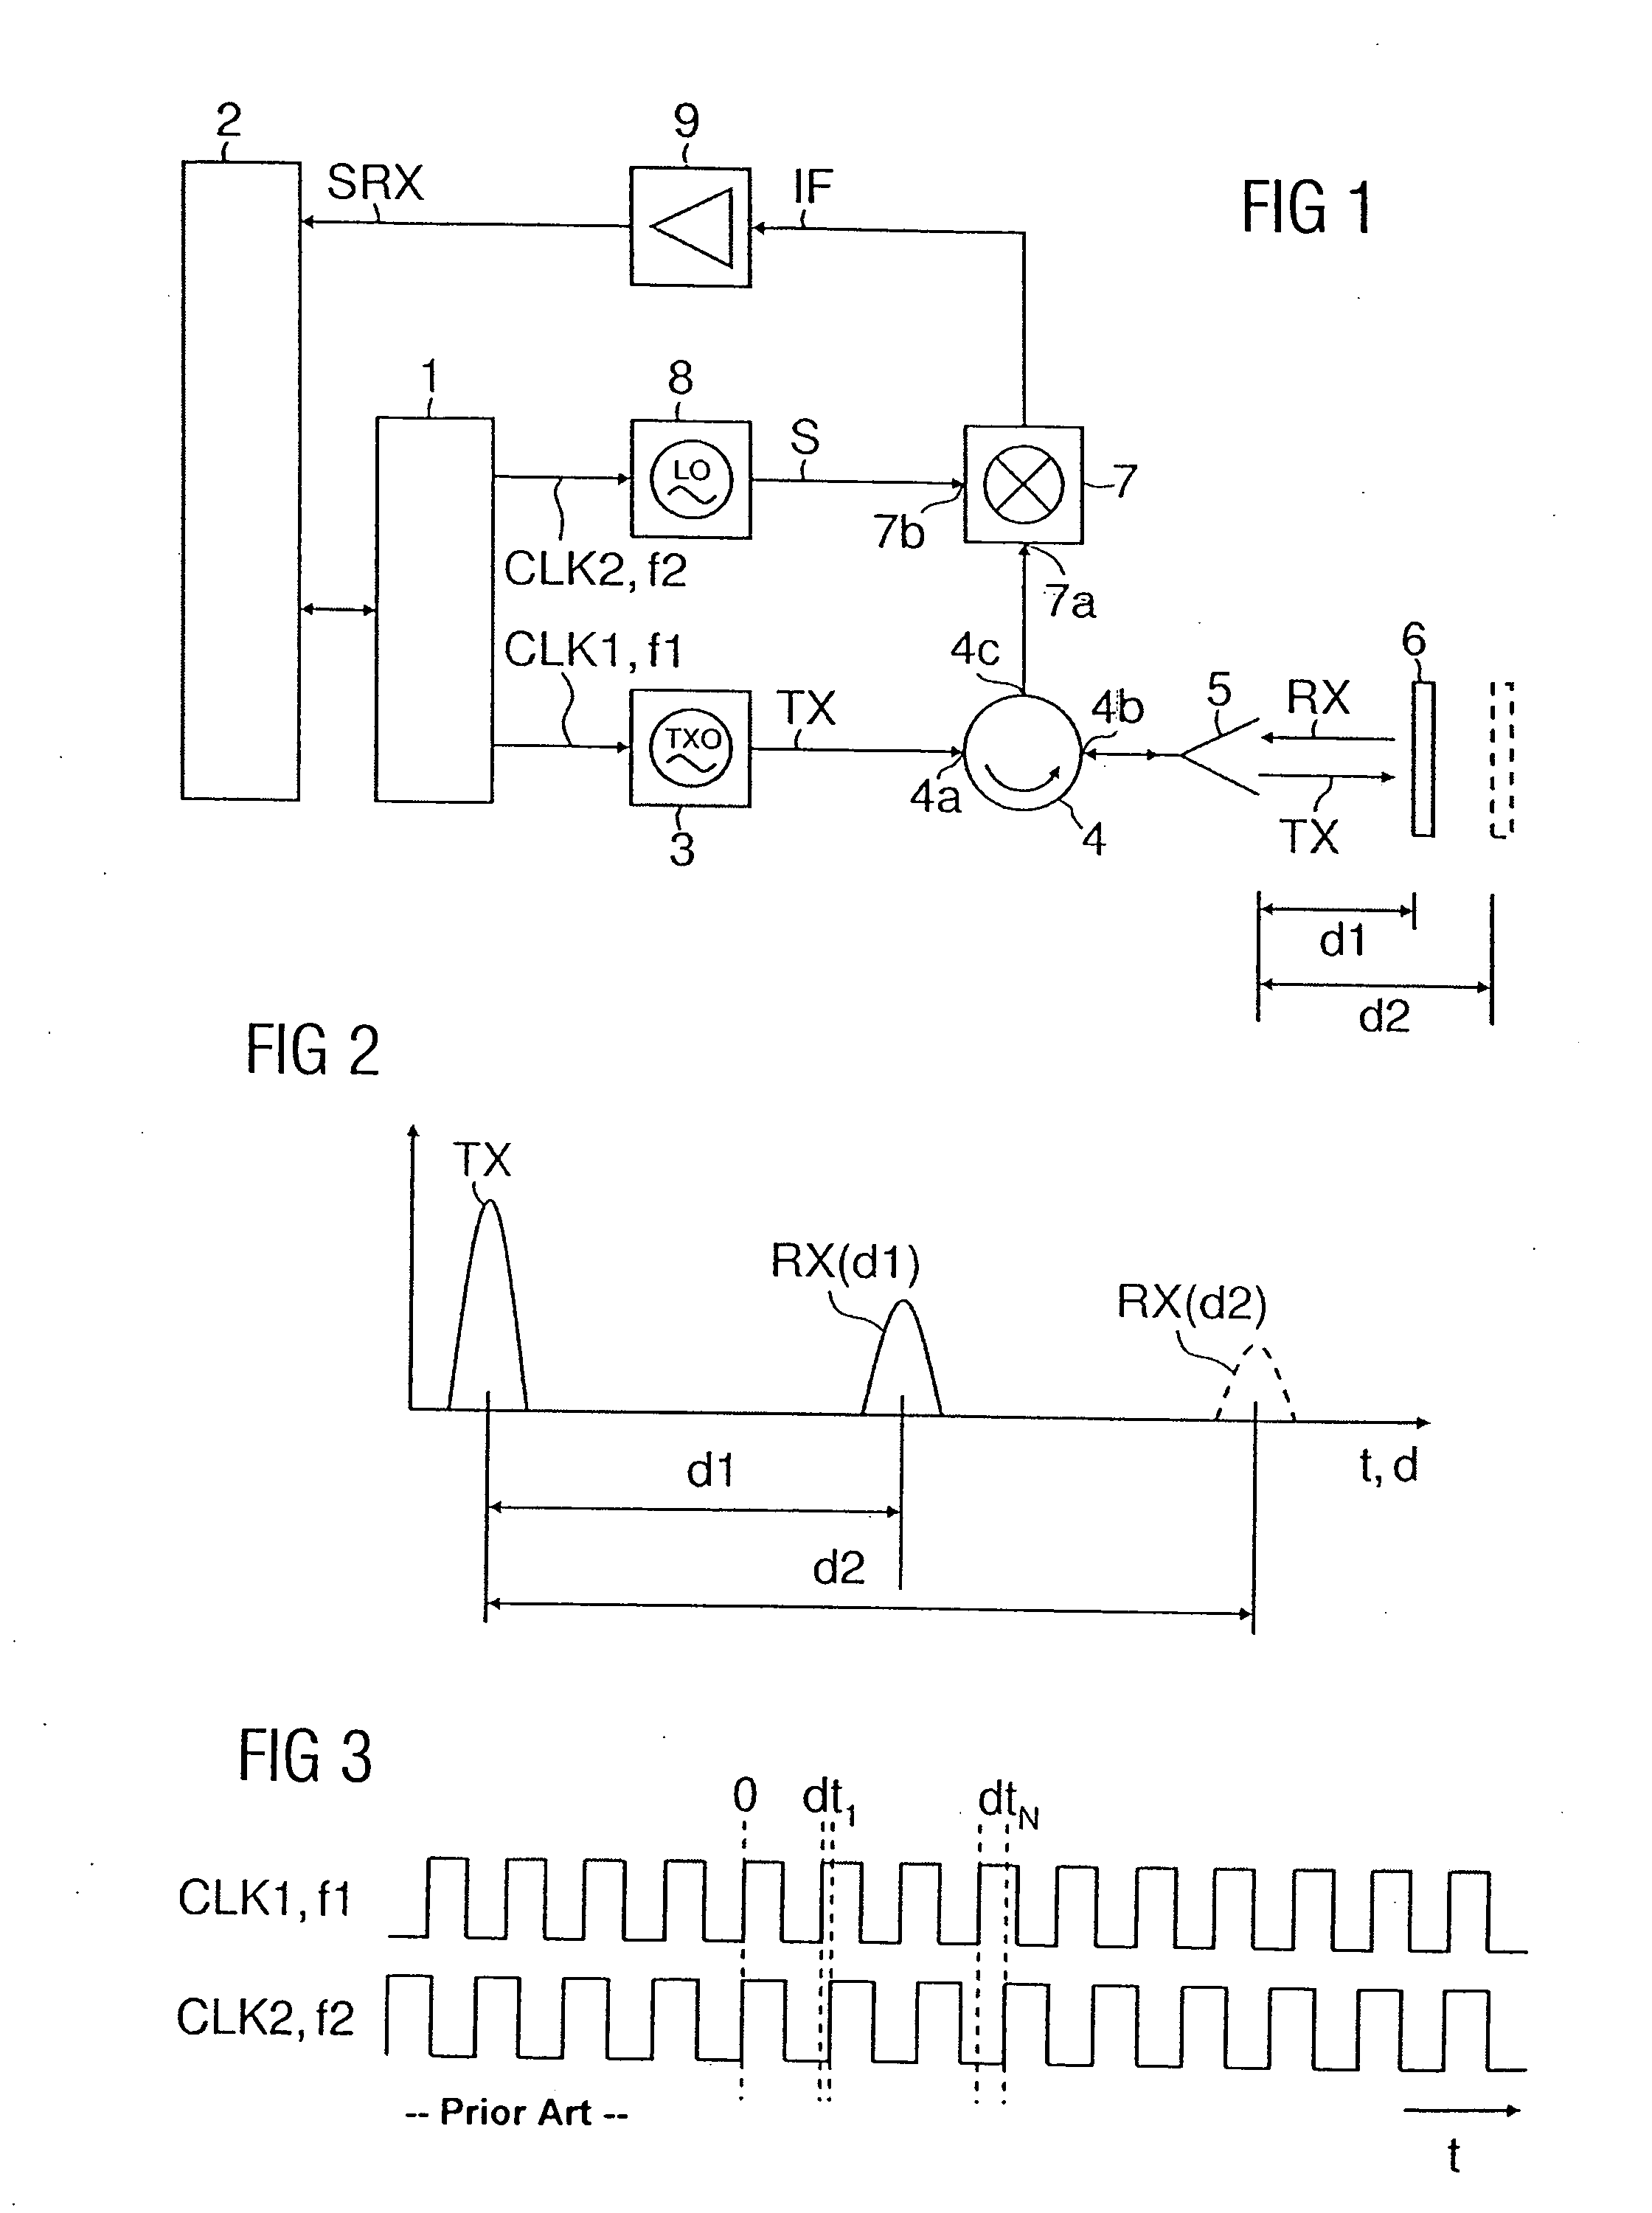 Digital Time Base Generator and Method for Providing a First Clock Signal and a Second Clock Signal